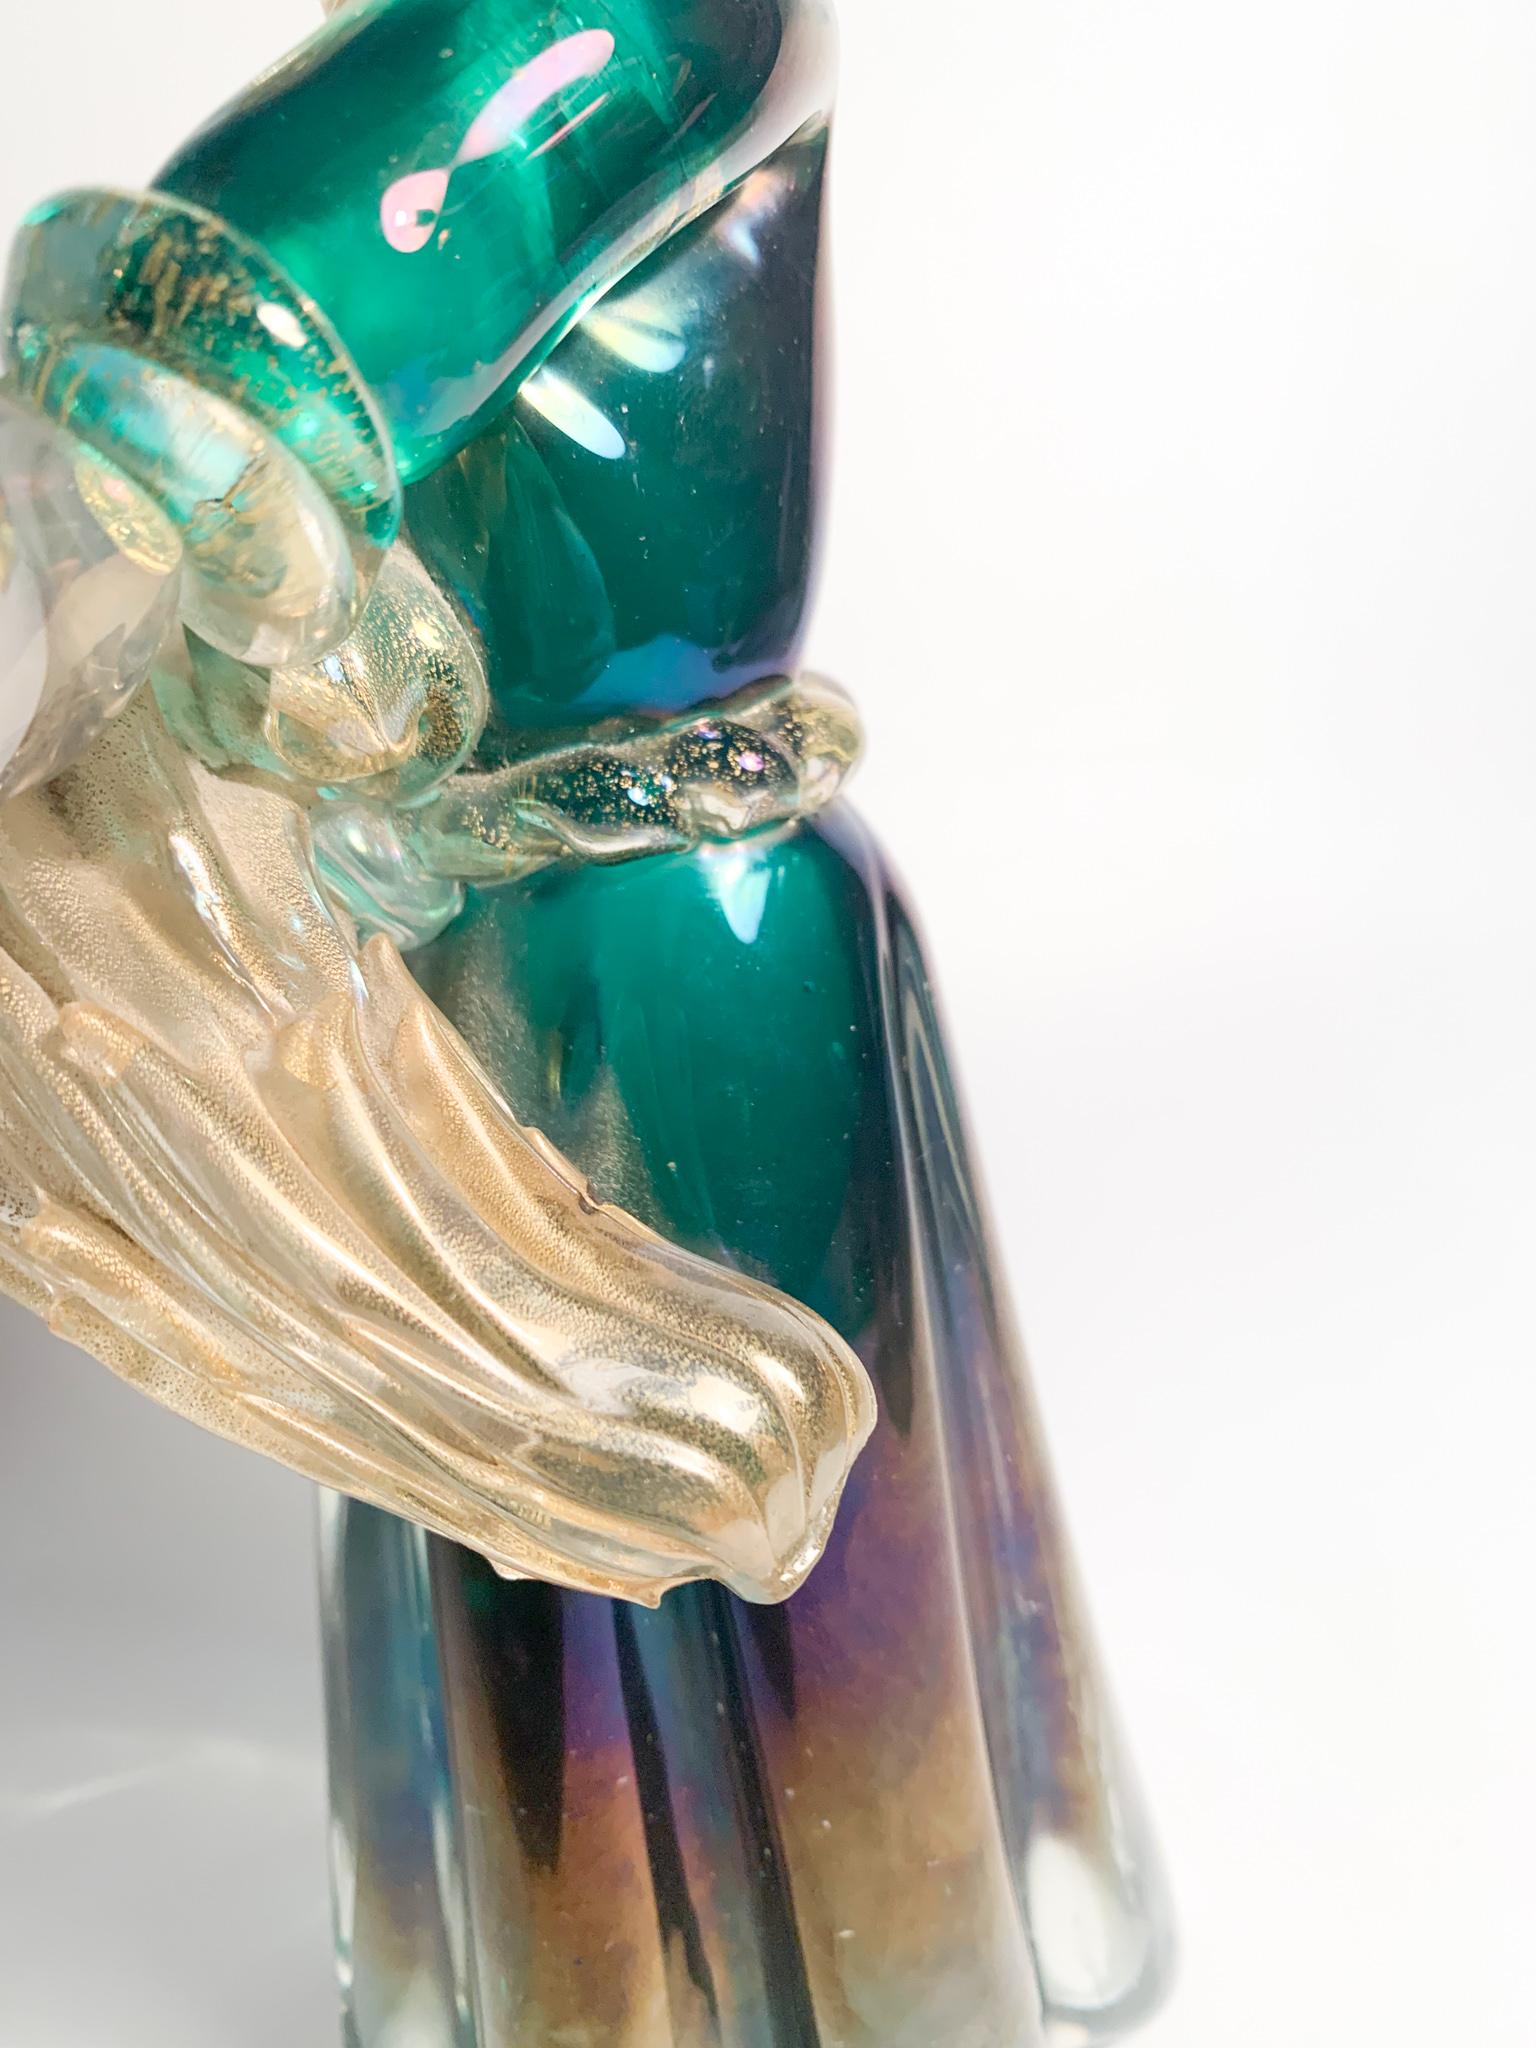 Iridescent Murano Glass Sculpture with Gold Leaves by Archimede Seguso 1940s For Sale 7